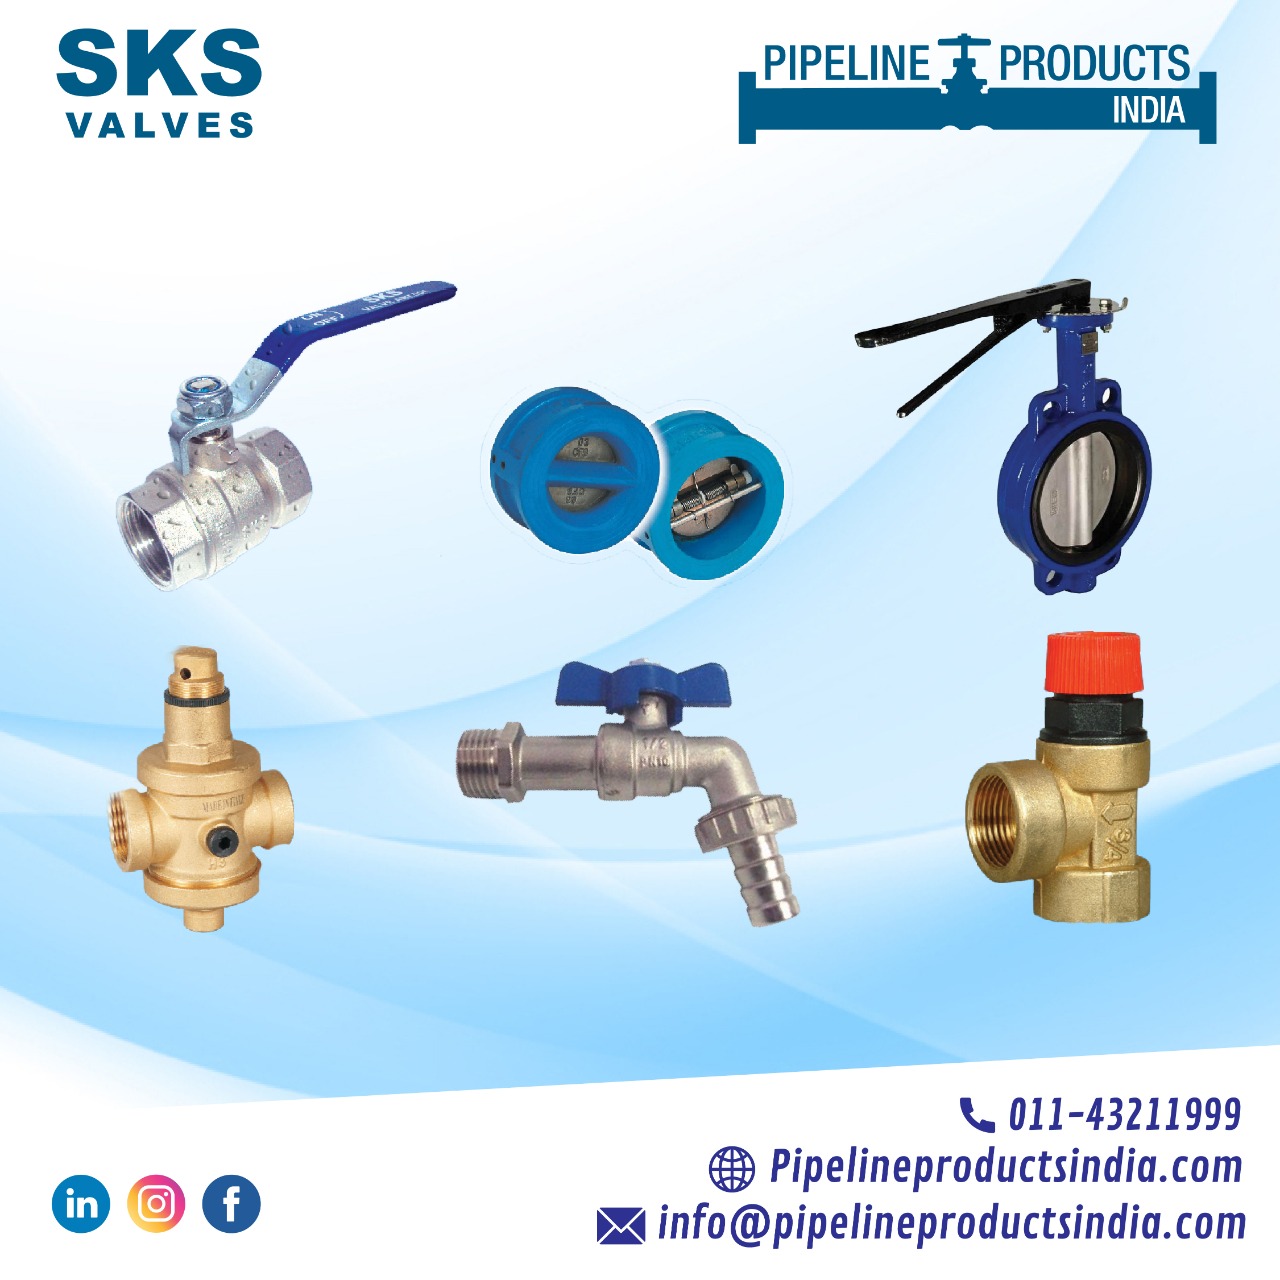 You are currently viewing Valves Dealer in Delhi, Ball Valve, Check Valve, Butterfly, Balancing Valves